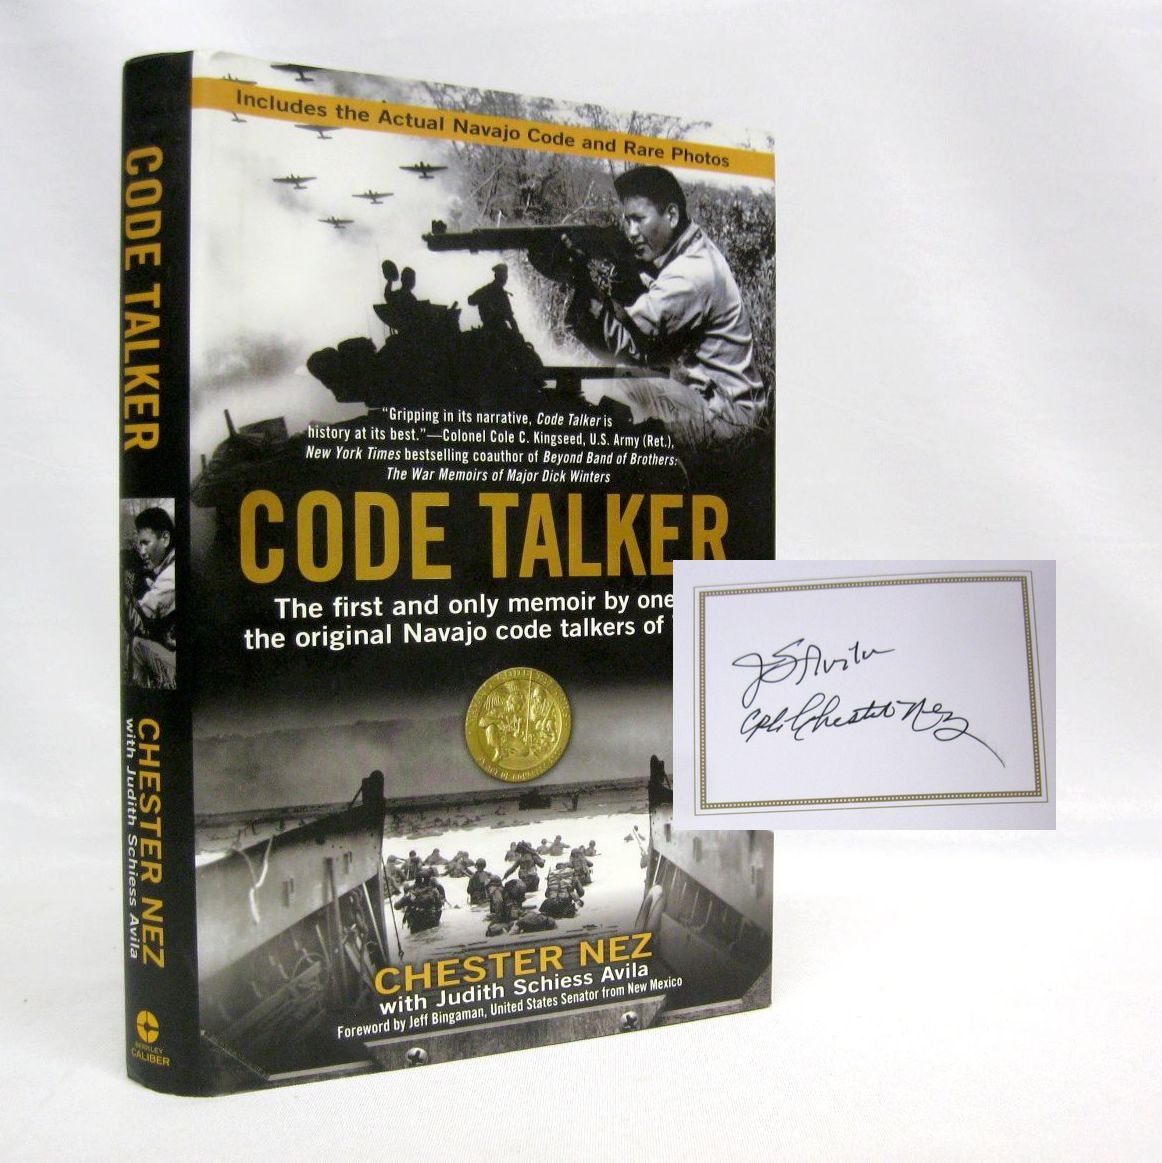 Code Talker: The first and only memoir by one of the original Navajo code talkers of WWII by Chester Nez and Judith Schiess Avila